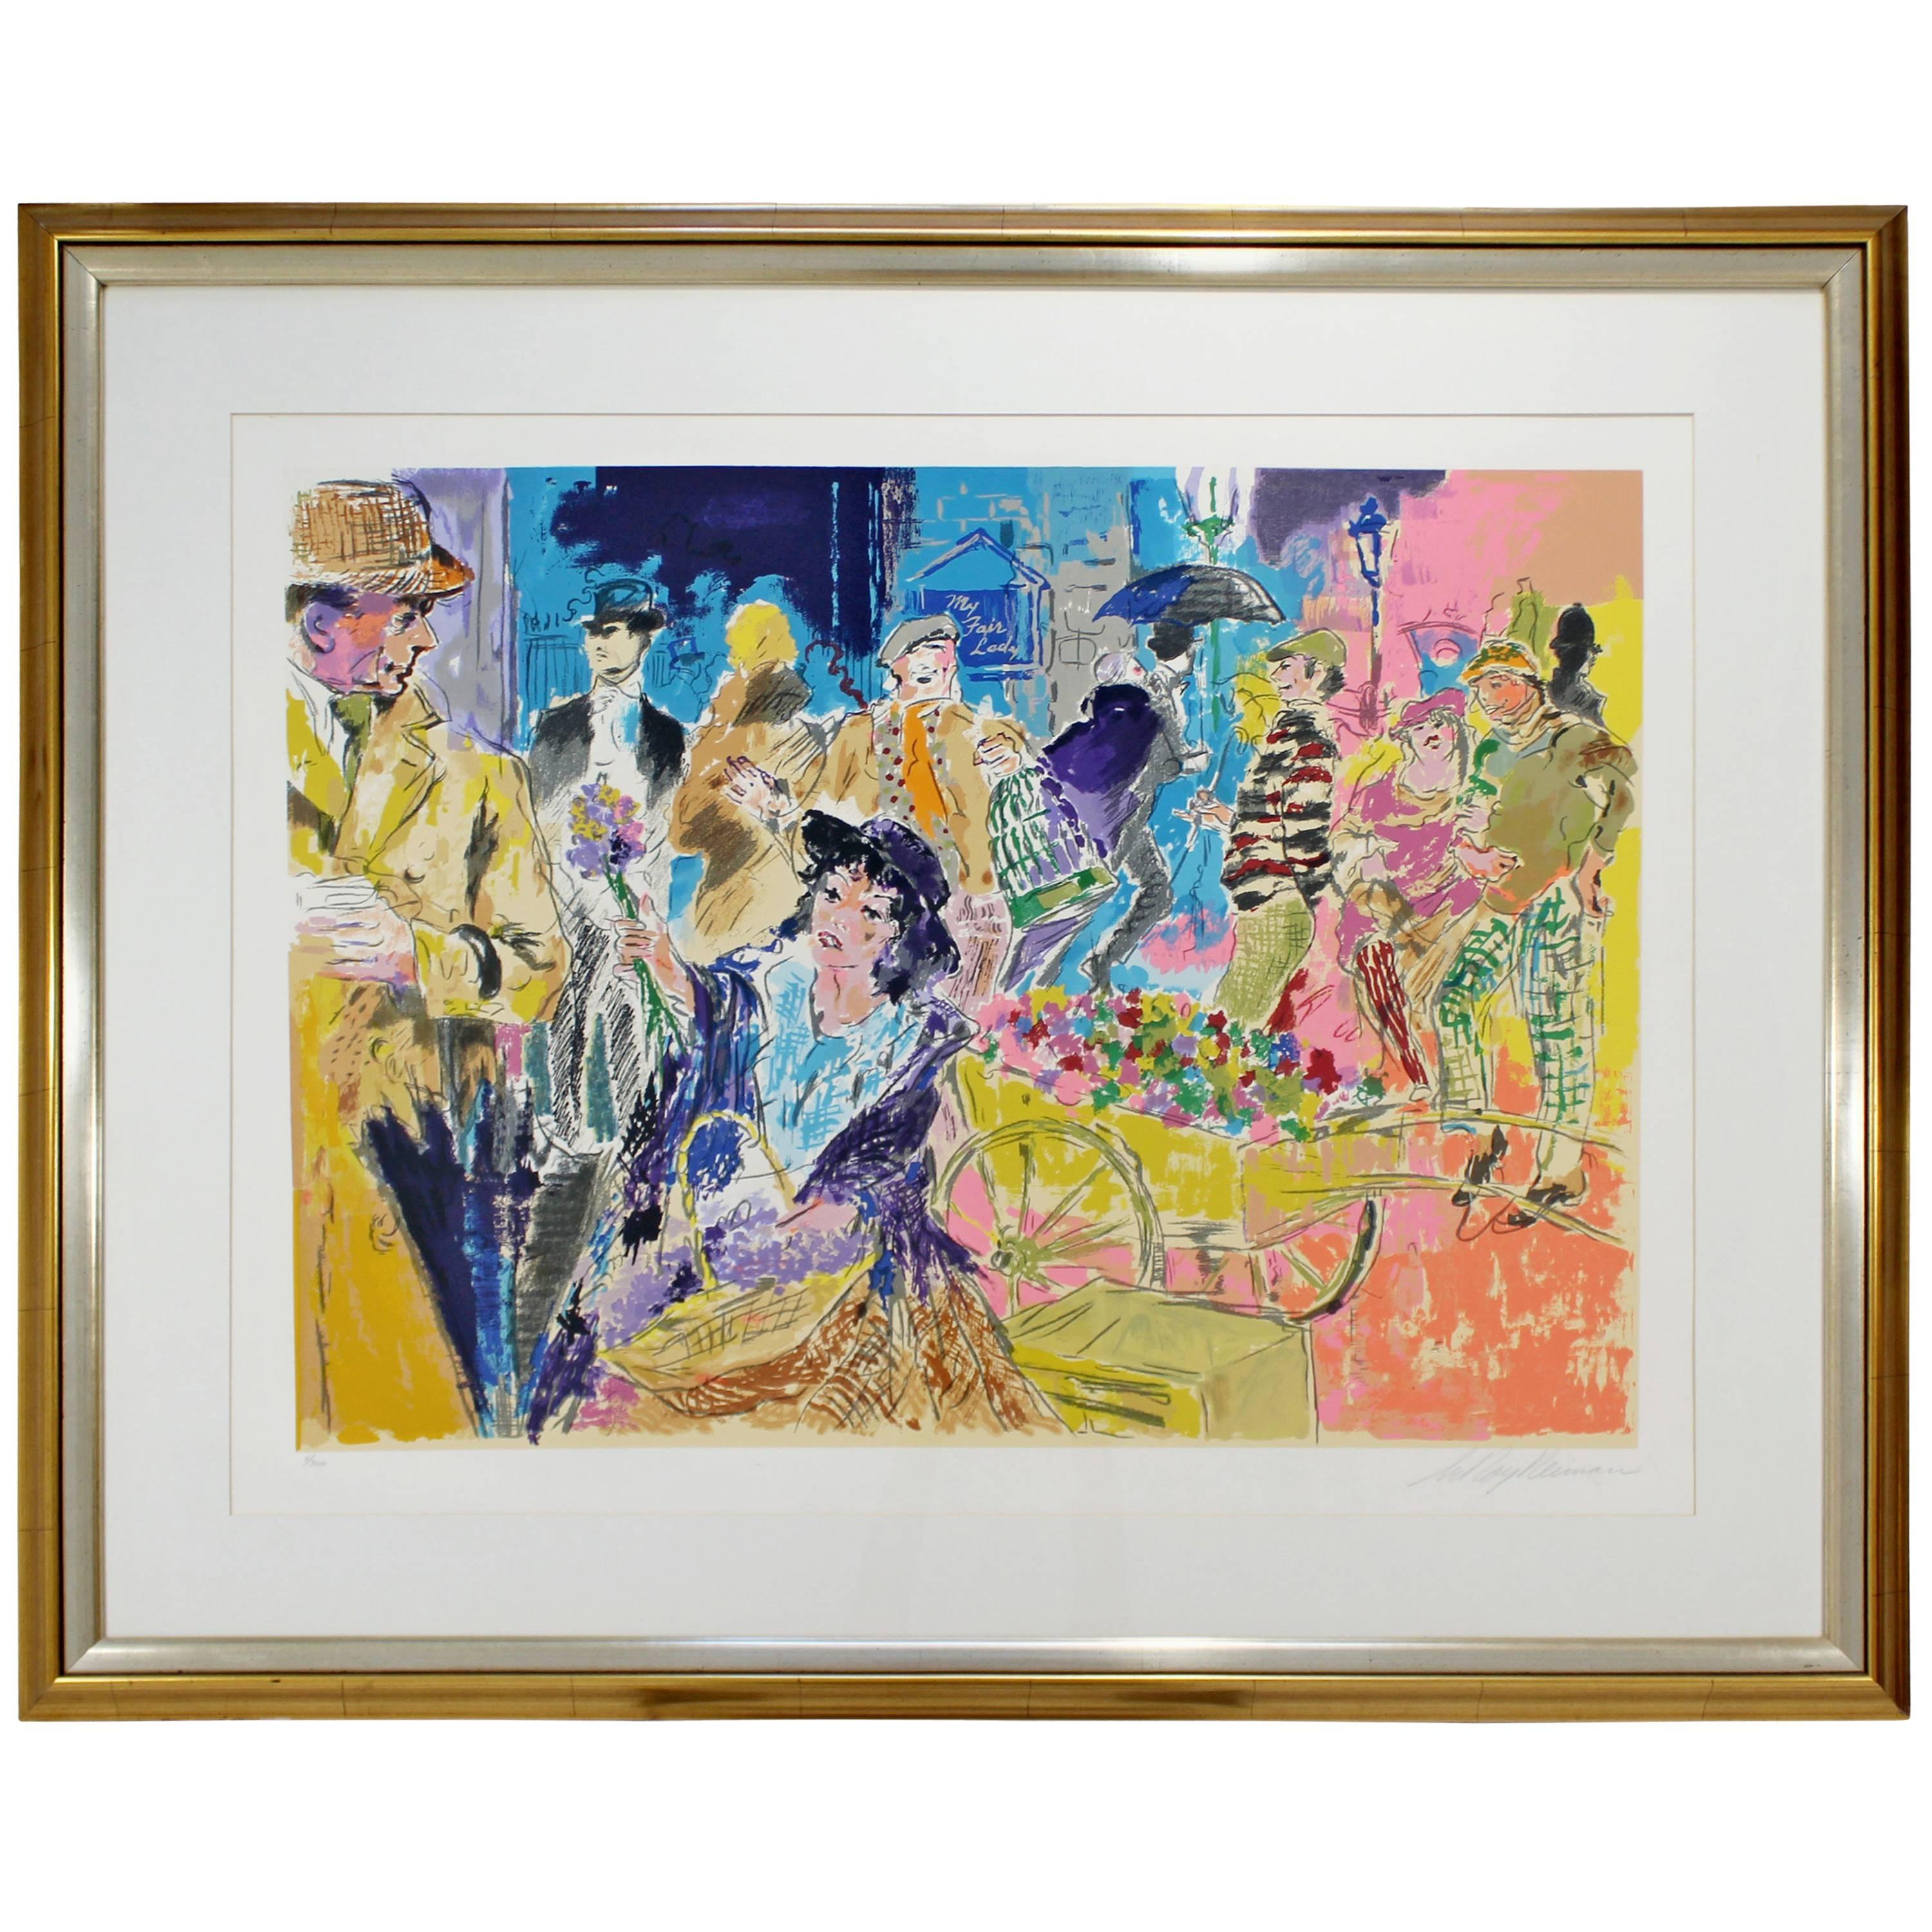 Mid-Century Modern Leroy Neiman Litho Signed Numbered 1/300 My Fair Lady Framed